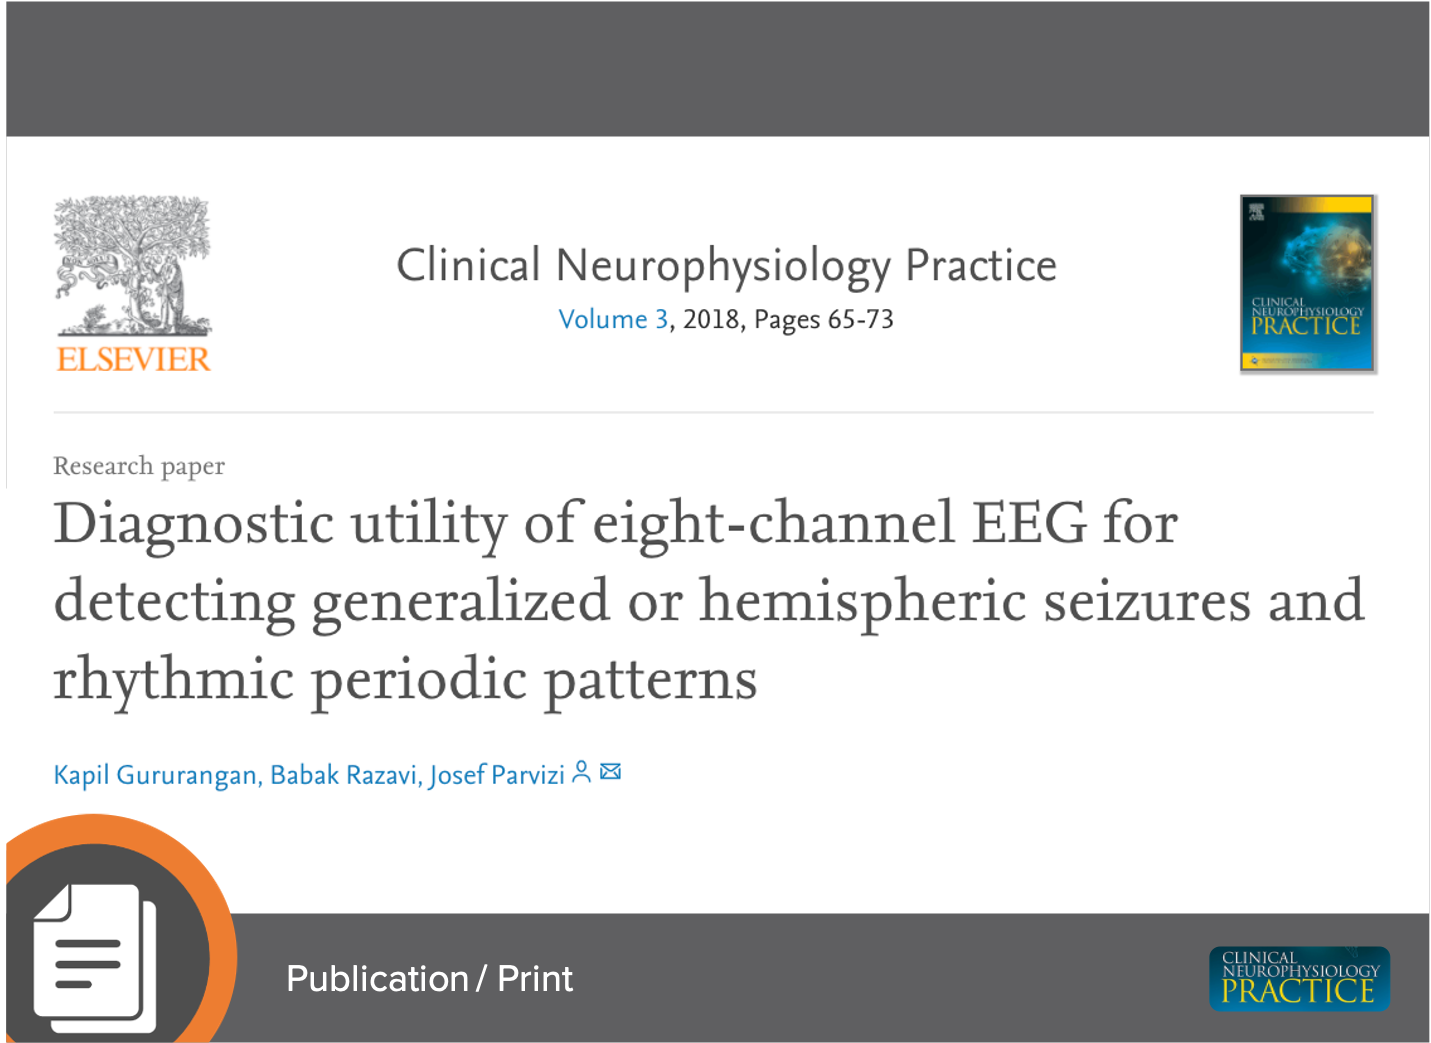 Circumferential Montage Manuscript: Diagnostic Utility of 8-channel EEG For Detecting Generalized Seizure